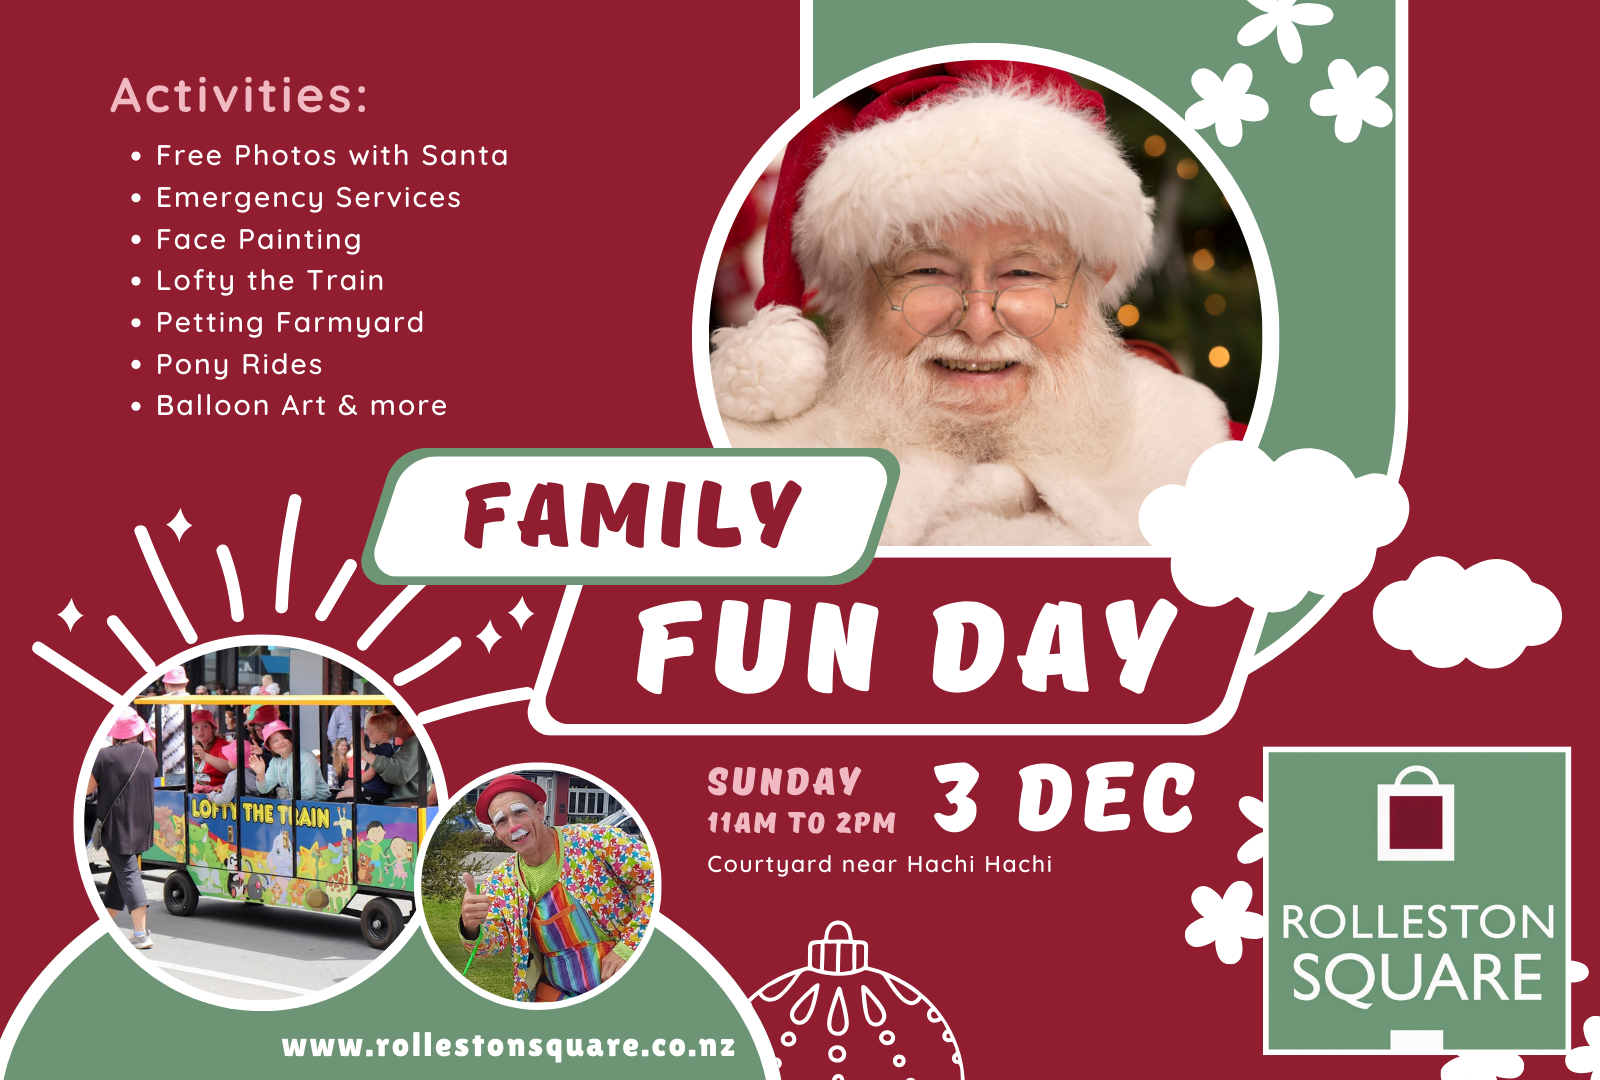 Rolleston Square Family Fun Day with Santa Photos and Activities